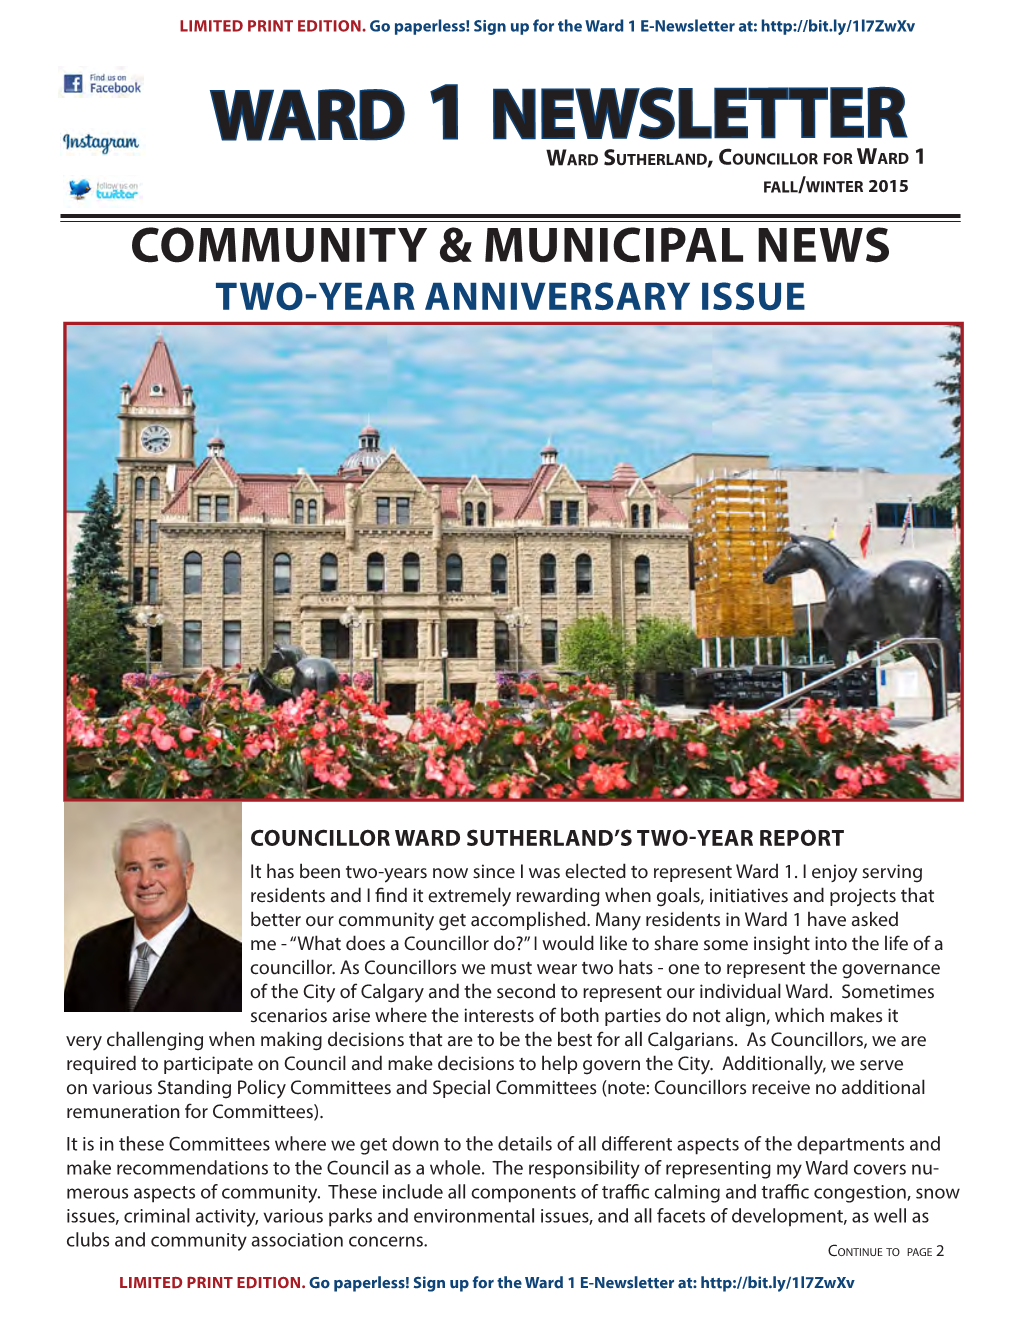 Ward 1 Newsletter Ward Sutherland, Councillor for Ward 1 Fall/Winter 2015 COMMUNITY & MUNICIPAL NEWS TWO-YEAR ANNIVERSARY ISSUE